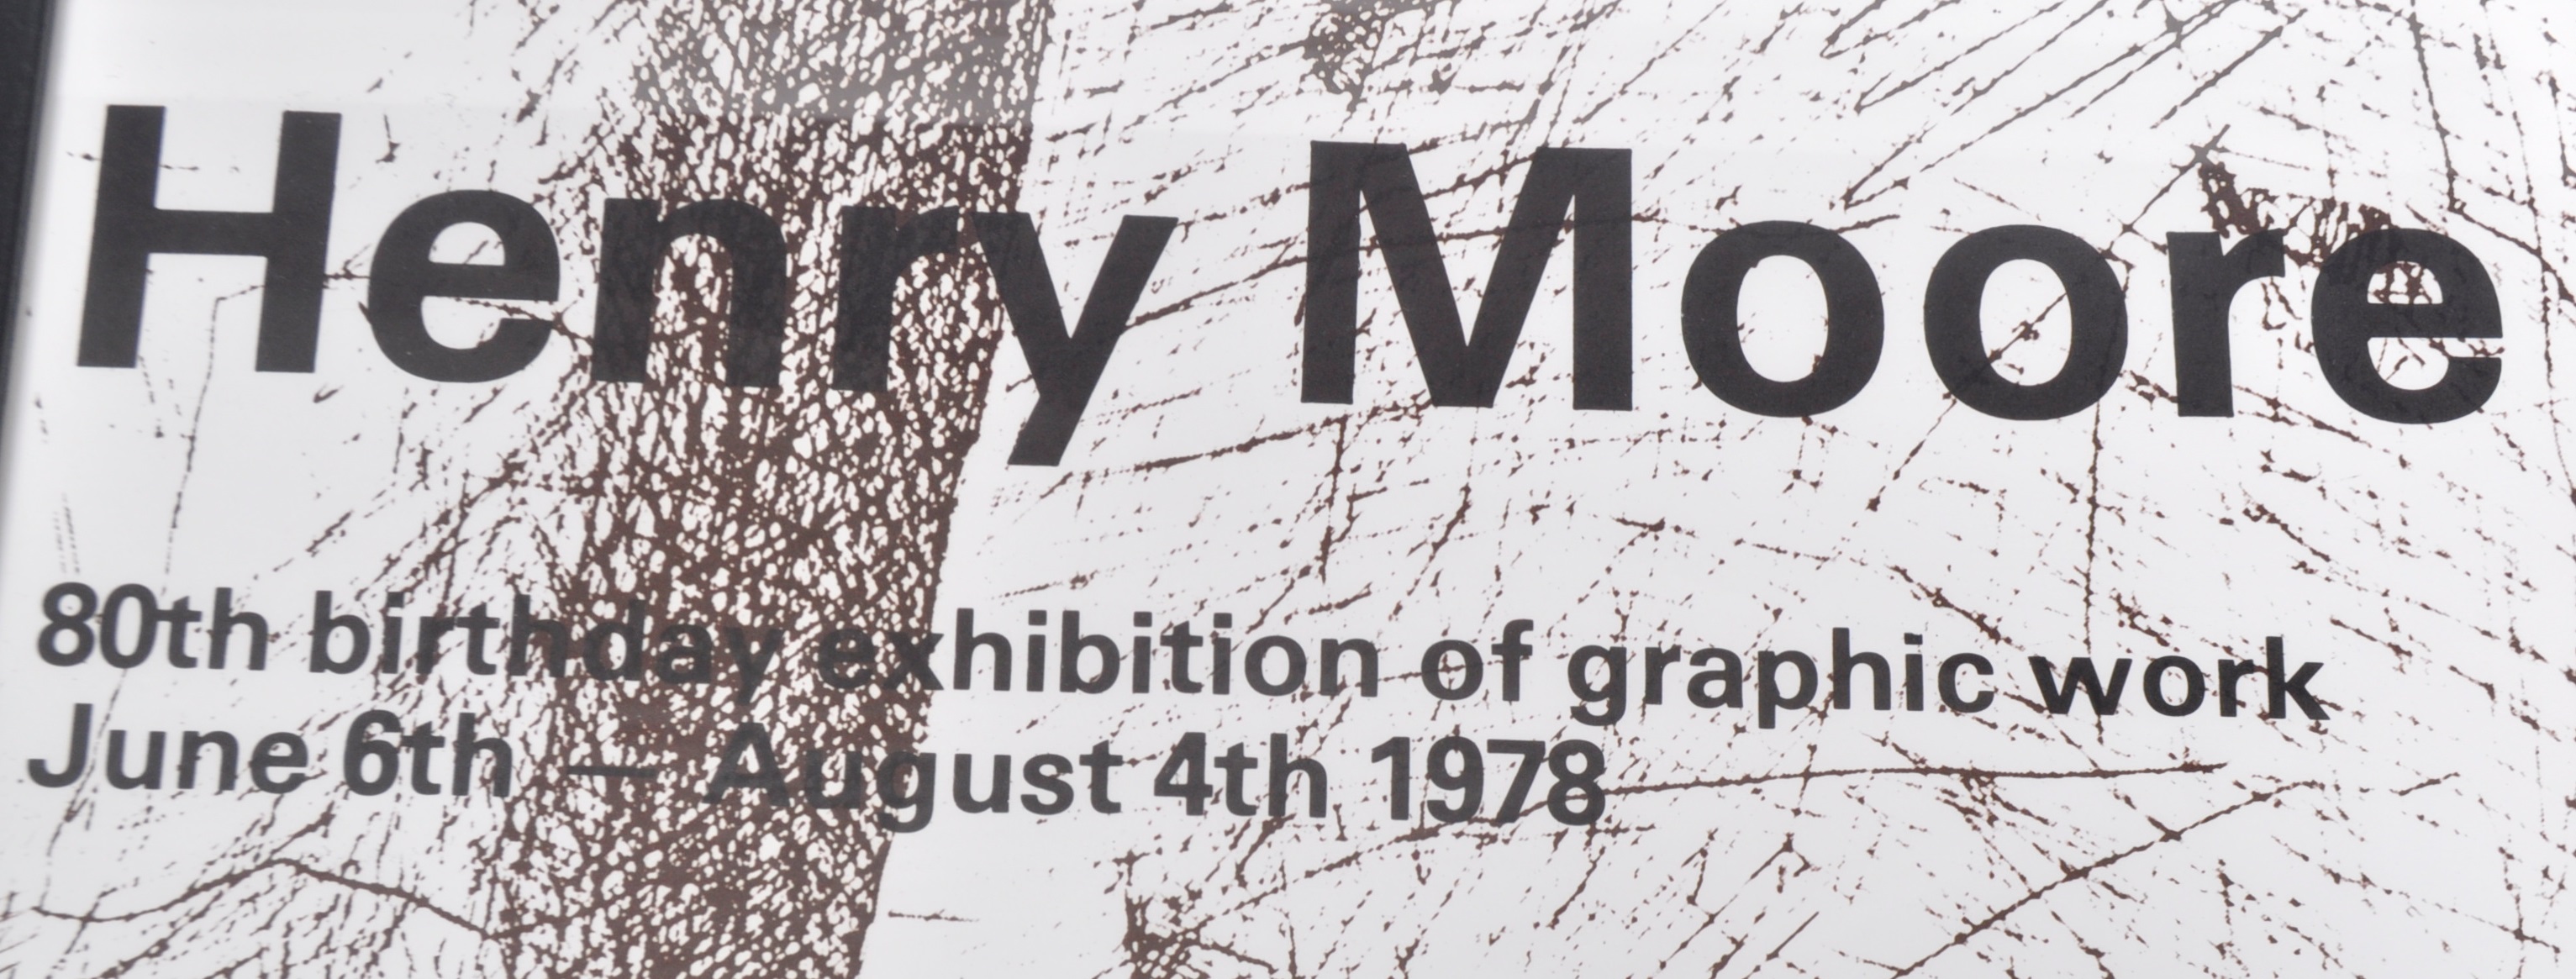 1970s GALLERY EXHIBITION POSTER FOR HENRY MOORE - Image 6 of 6